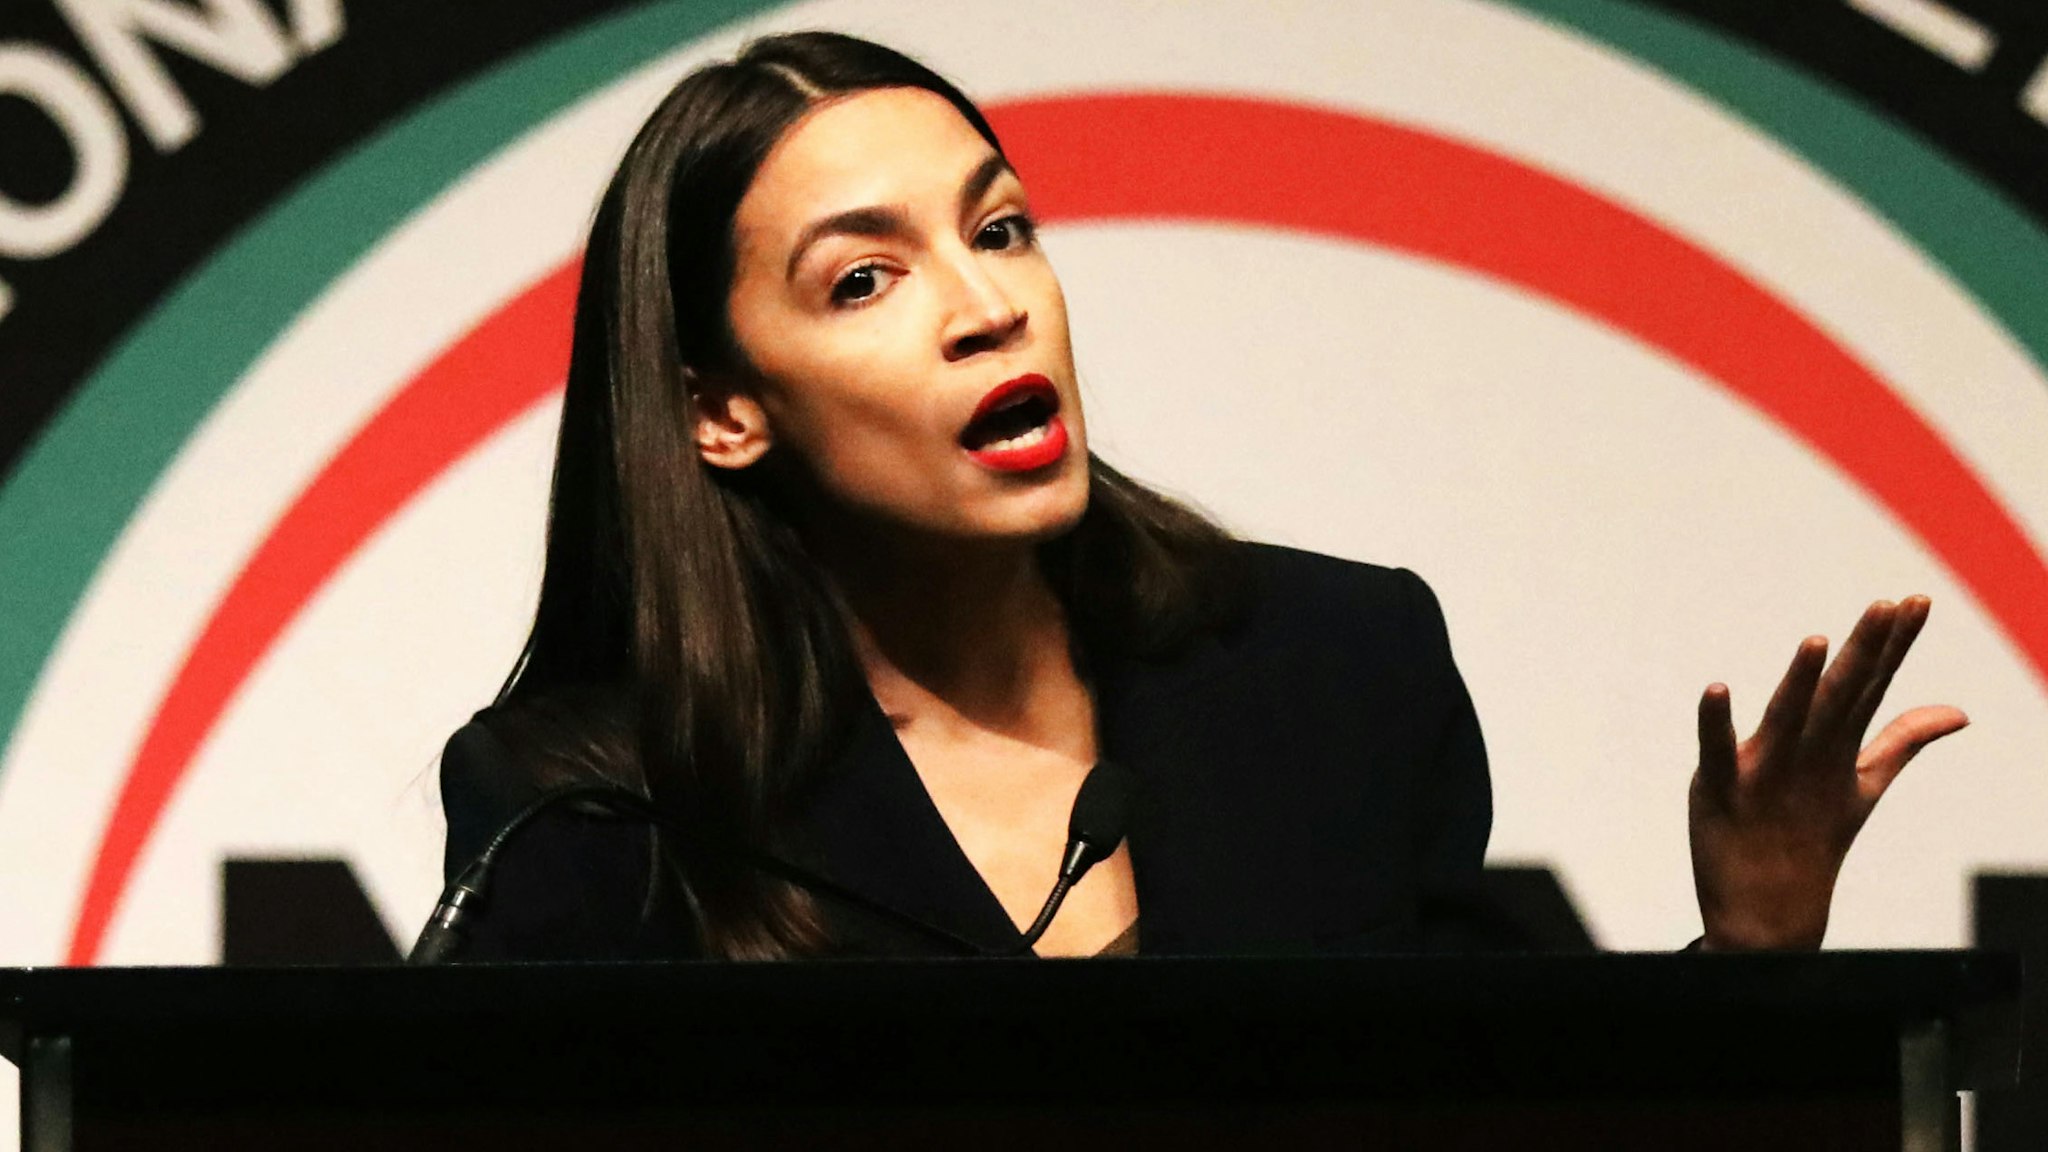 NEW YORK, NEW YORK - APRIL 05: U.S. Rep. Alexandria Ocasio-Cortez (D-NY) speaks at the National Action Network's annual convention on April 5, 2019 in New York City. Founded by Rev. Al Sharpton in 1991, the National Action Network is one of the most influential African American organizations dedicated to civil rights in America.